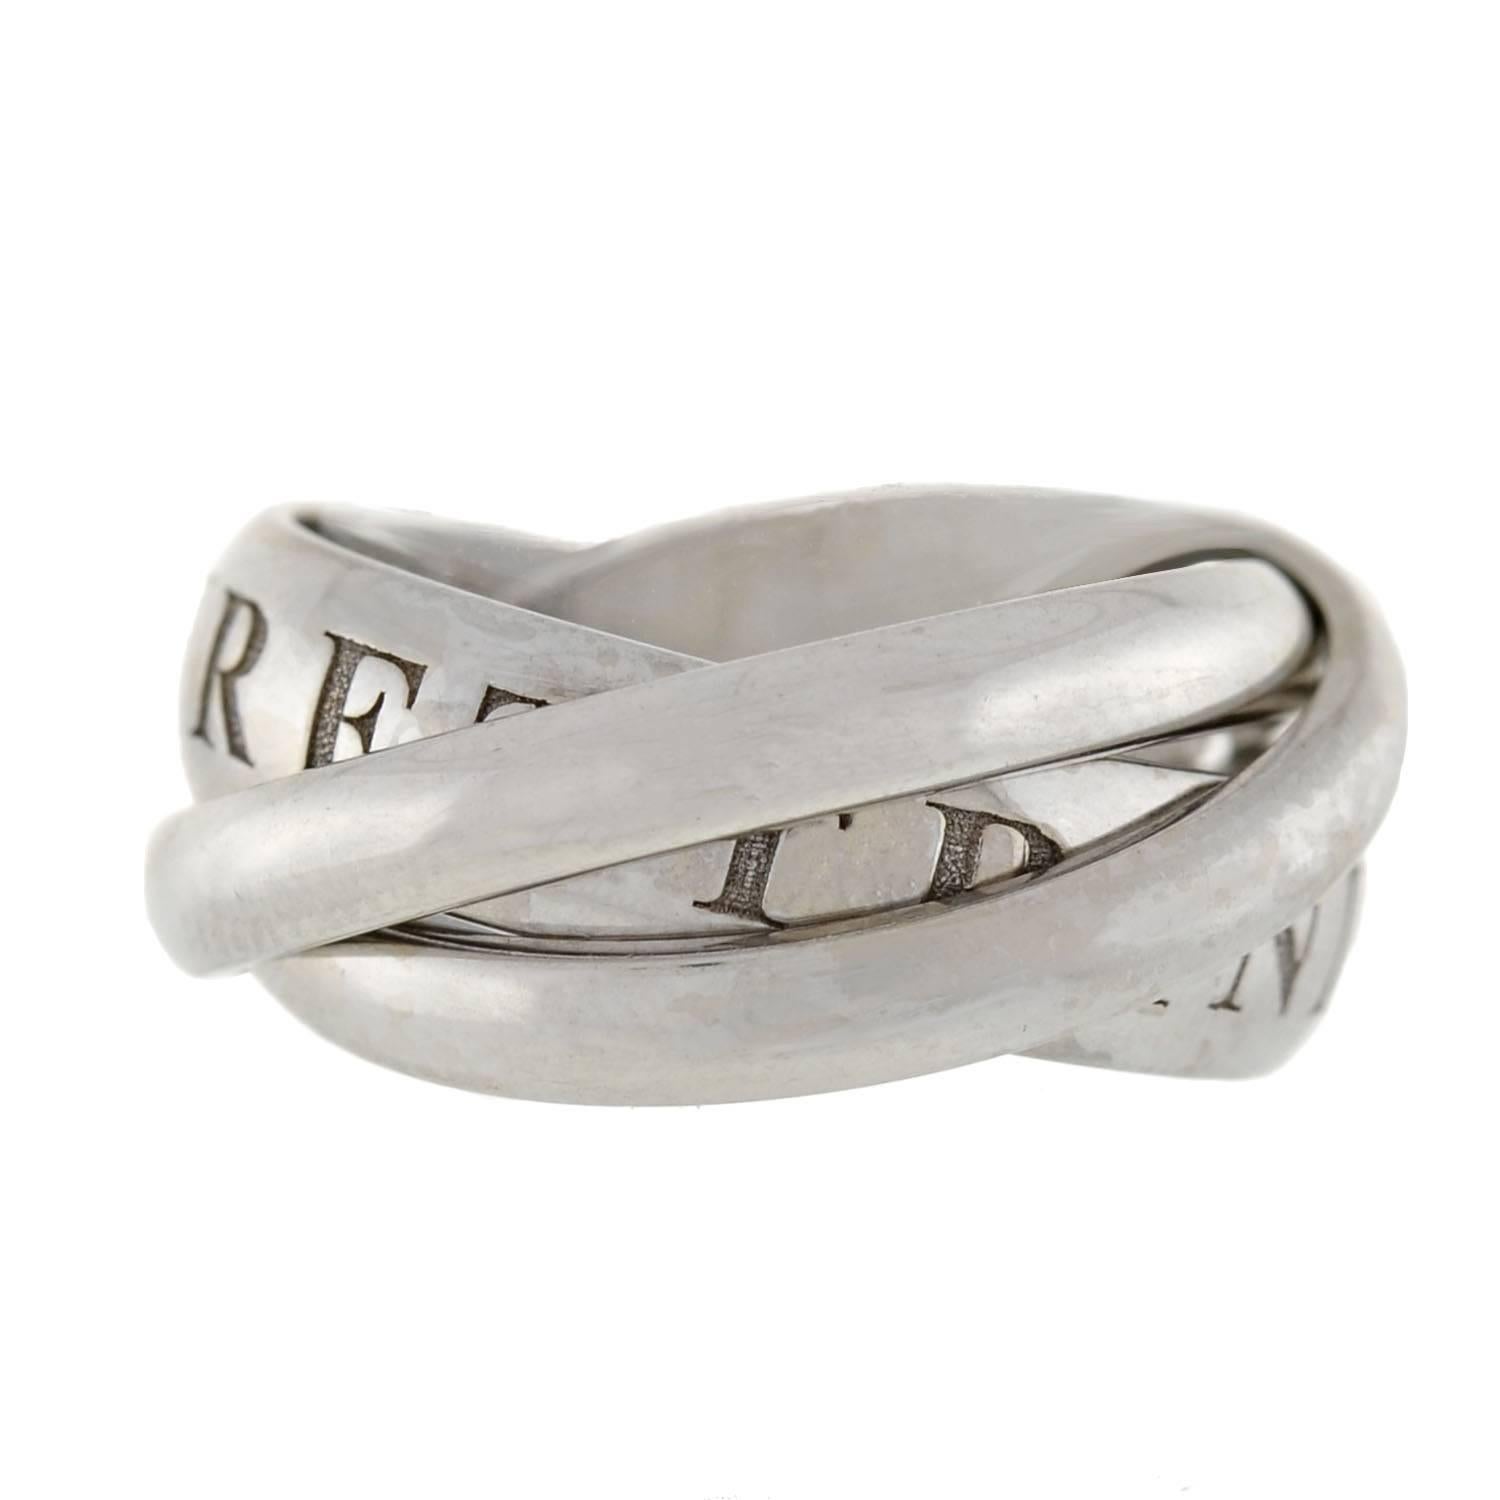 This limited edition ﻿Cartier﻿ Trinity ring (also known as a 